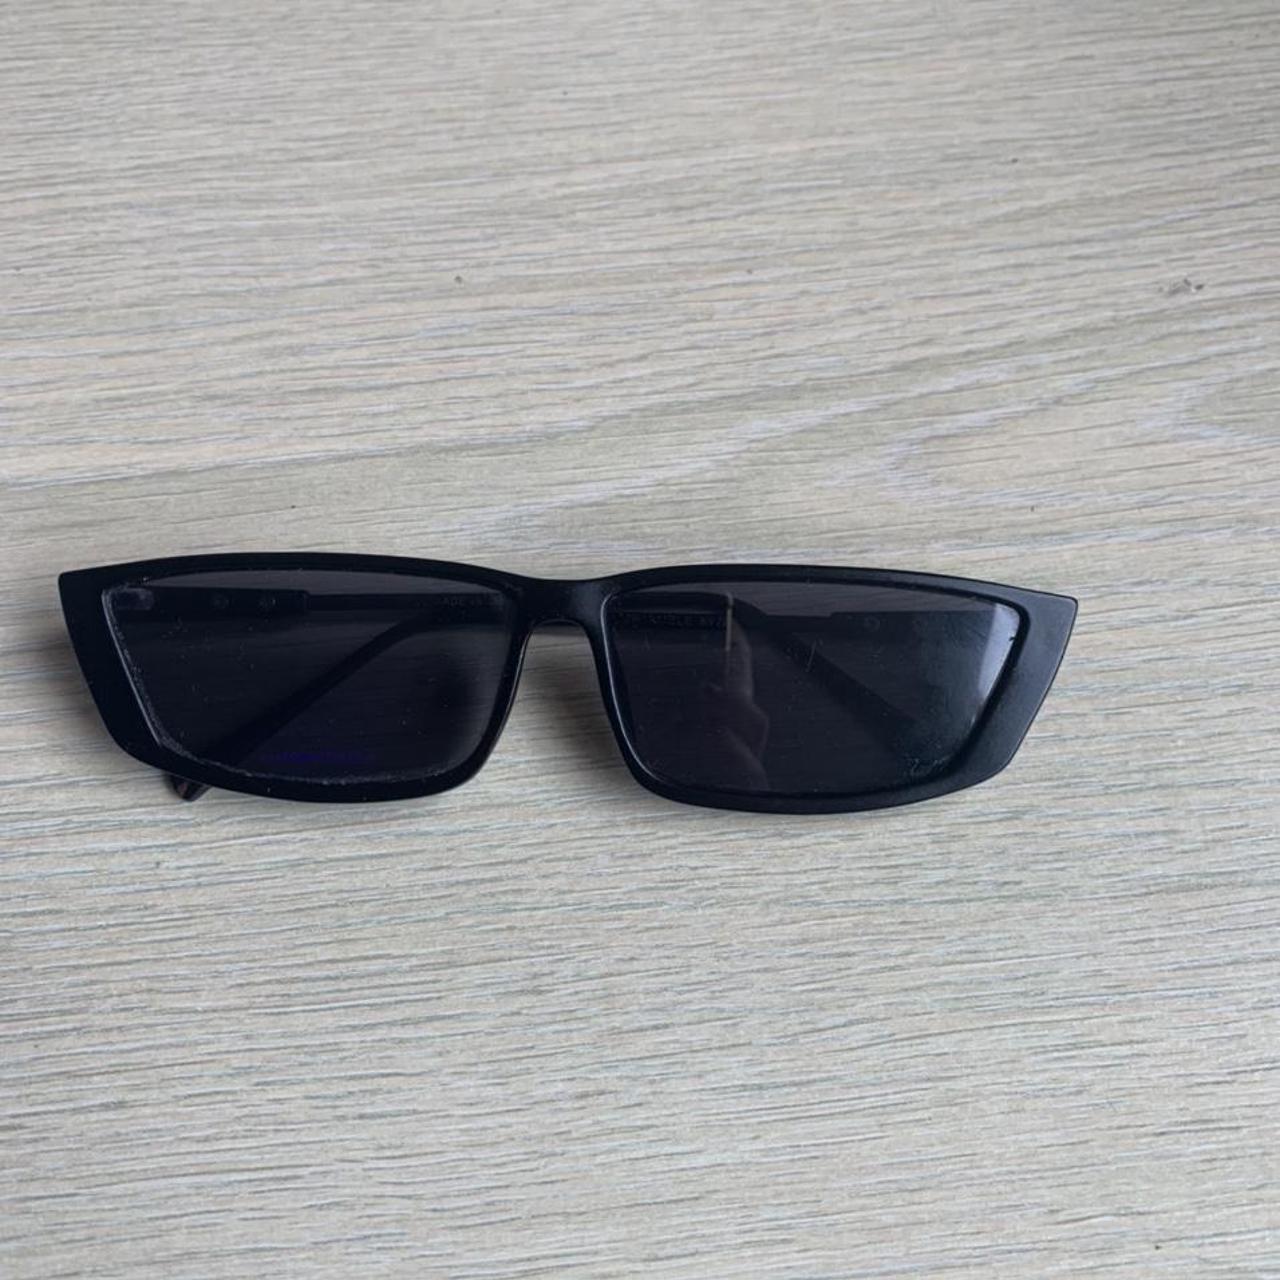 Black y2k style sunglasses thin frame great for... - Depop